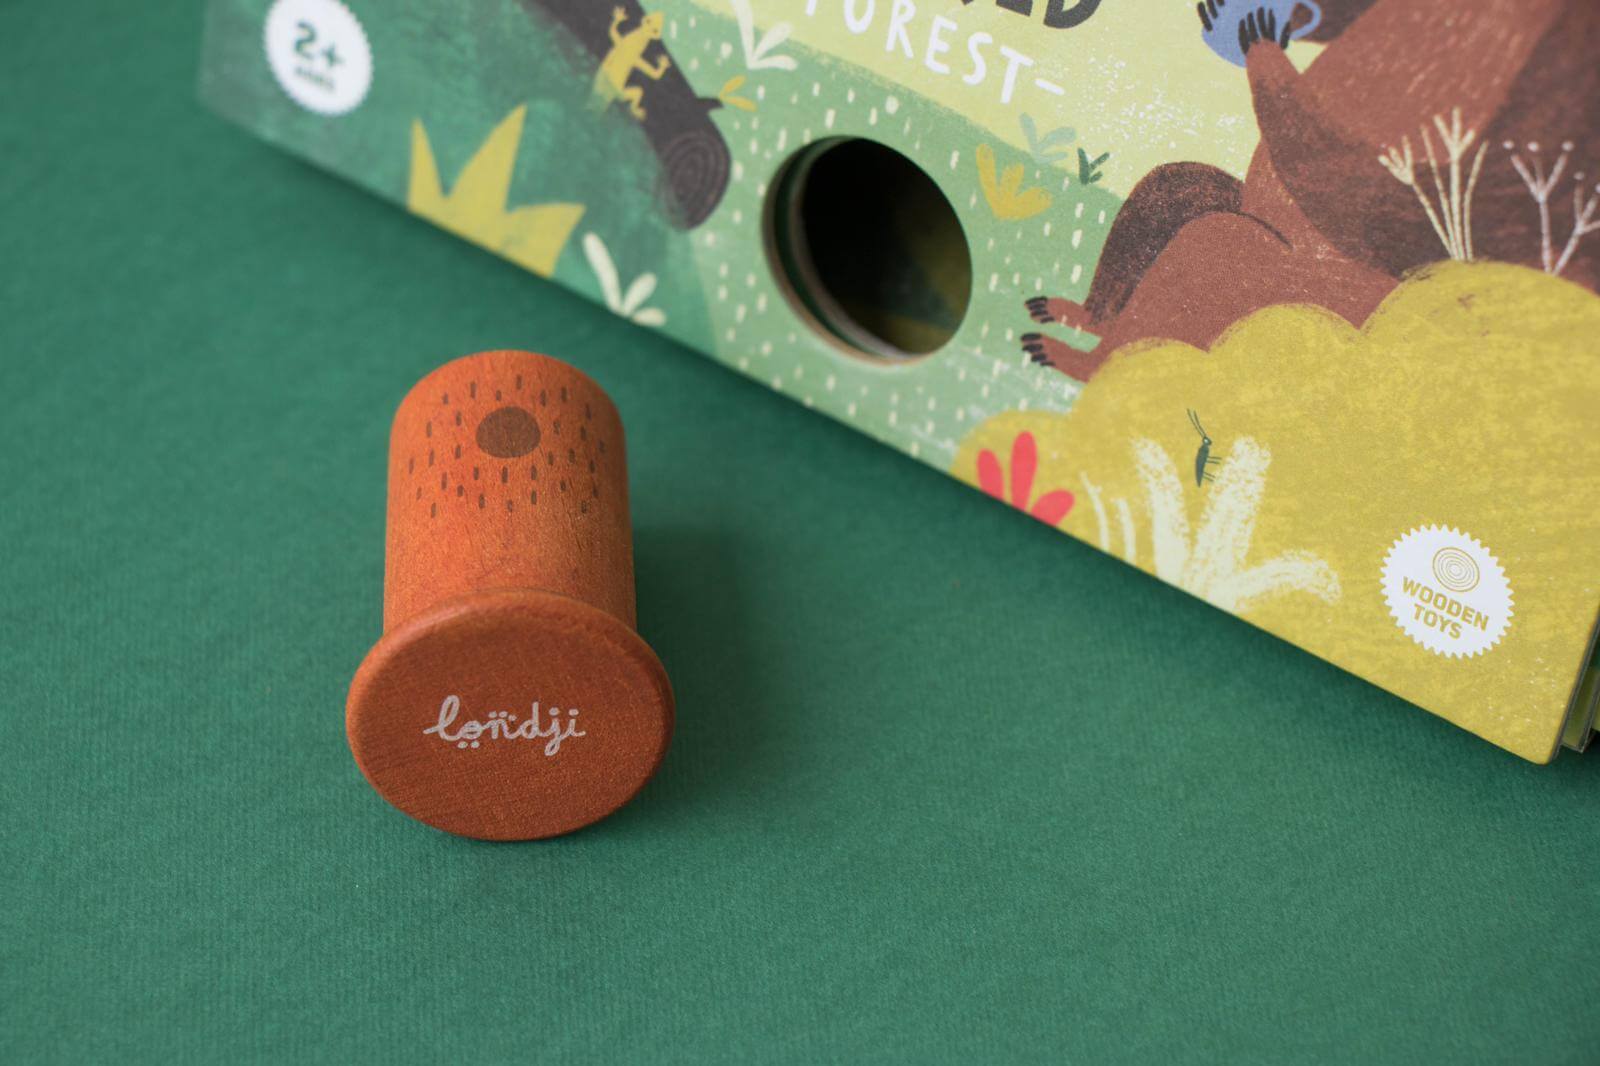 Londji - My Wooden World Forest | Toddler Wooden Toy | Arch & Ted - Australia